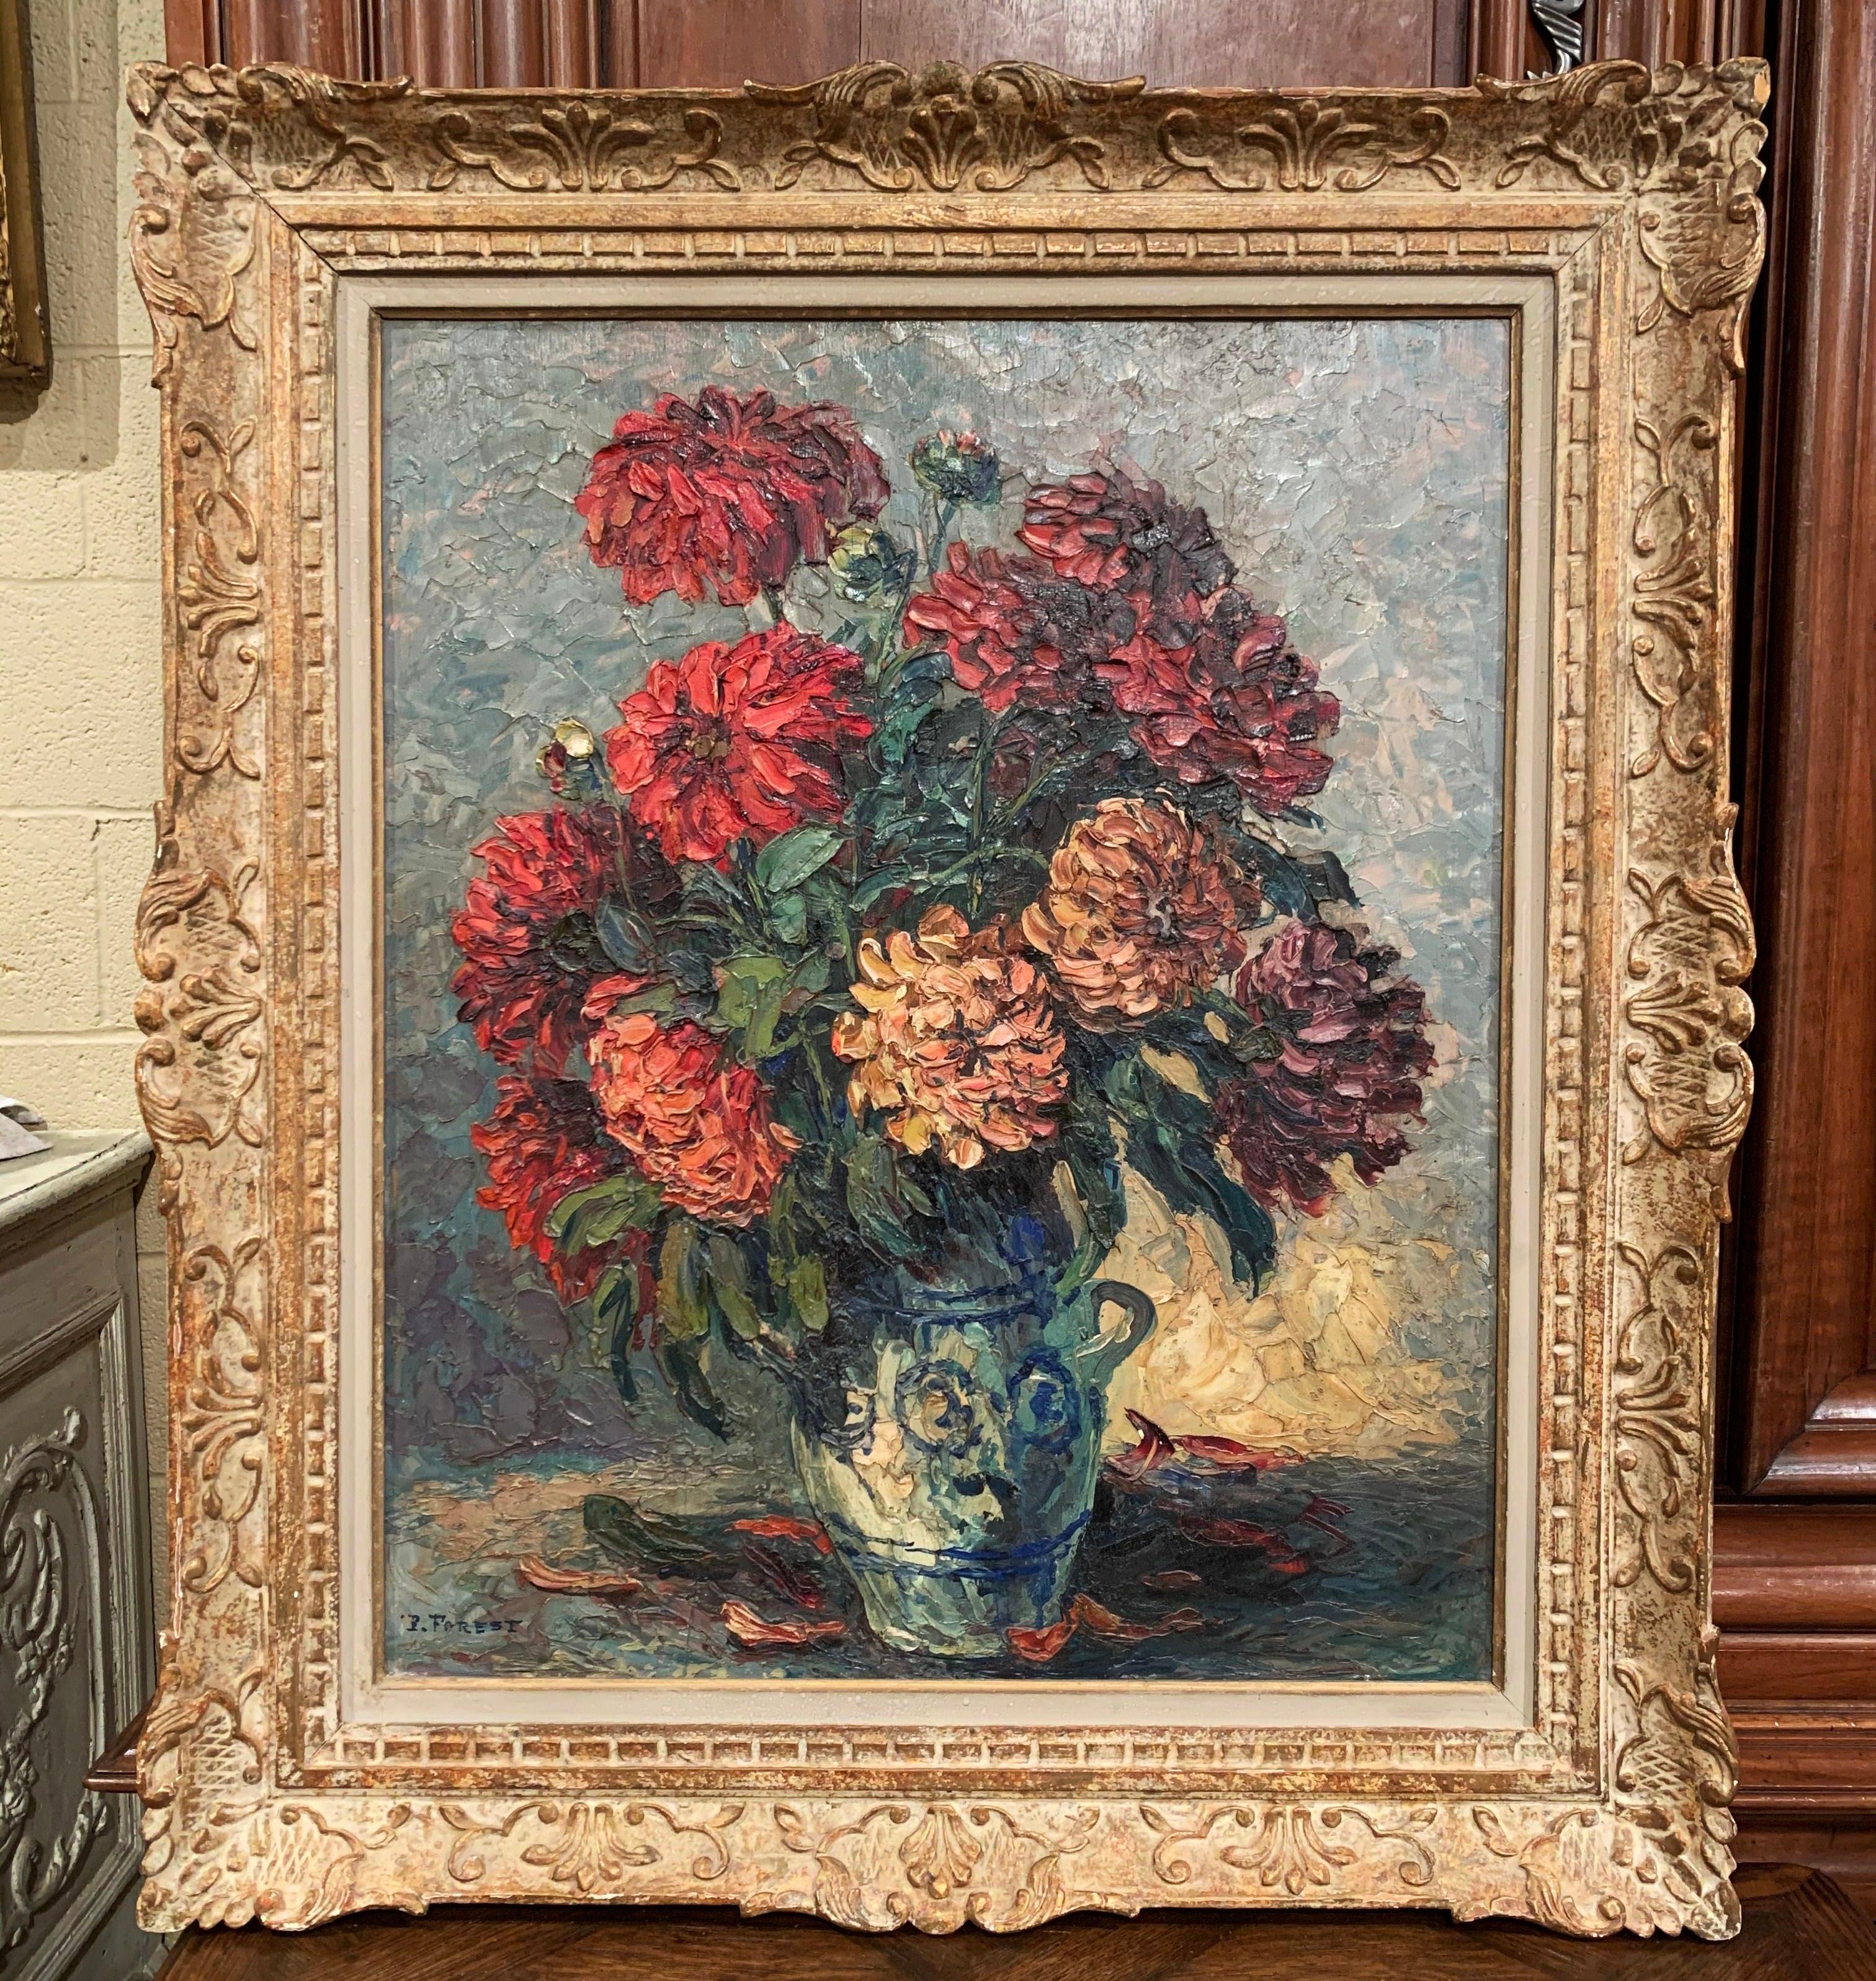 Wood Early 20th Century Oil on Board Flower Painting in Carved Frame Signed P. Forest